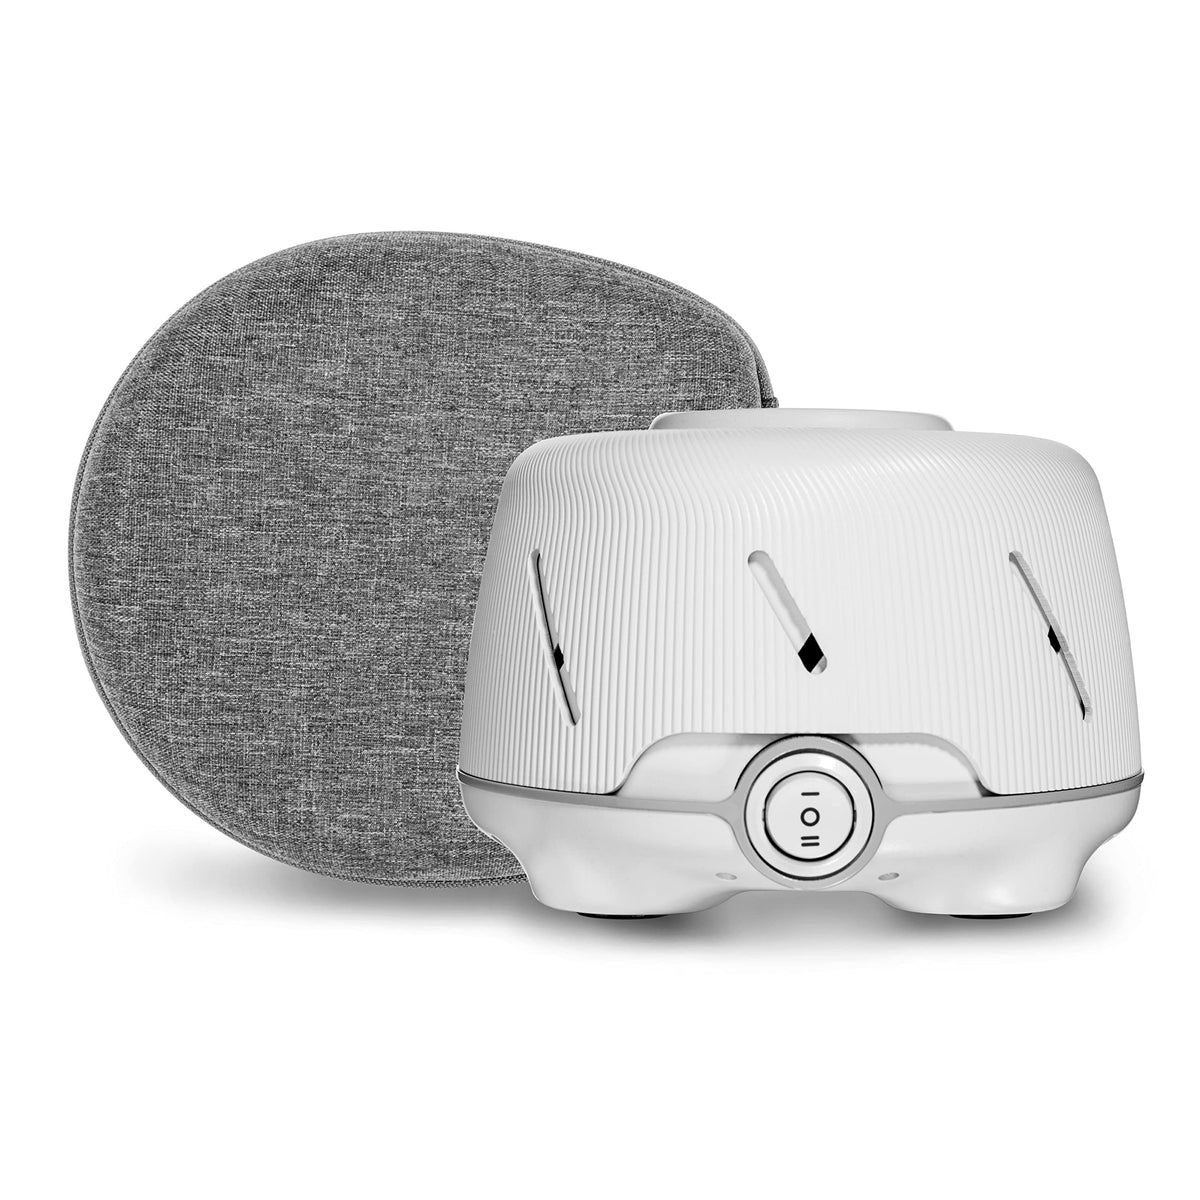 Marpac Yogasleep WhiteGray Plus The Original White Machine Soothing Natural Sound from a Real Fan Noise Cancelling Sleep Therapy Office Privacy, Dohm Gray & Travel Case, 1 Count, 2 Piece Set